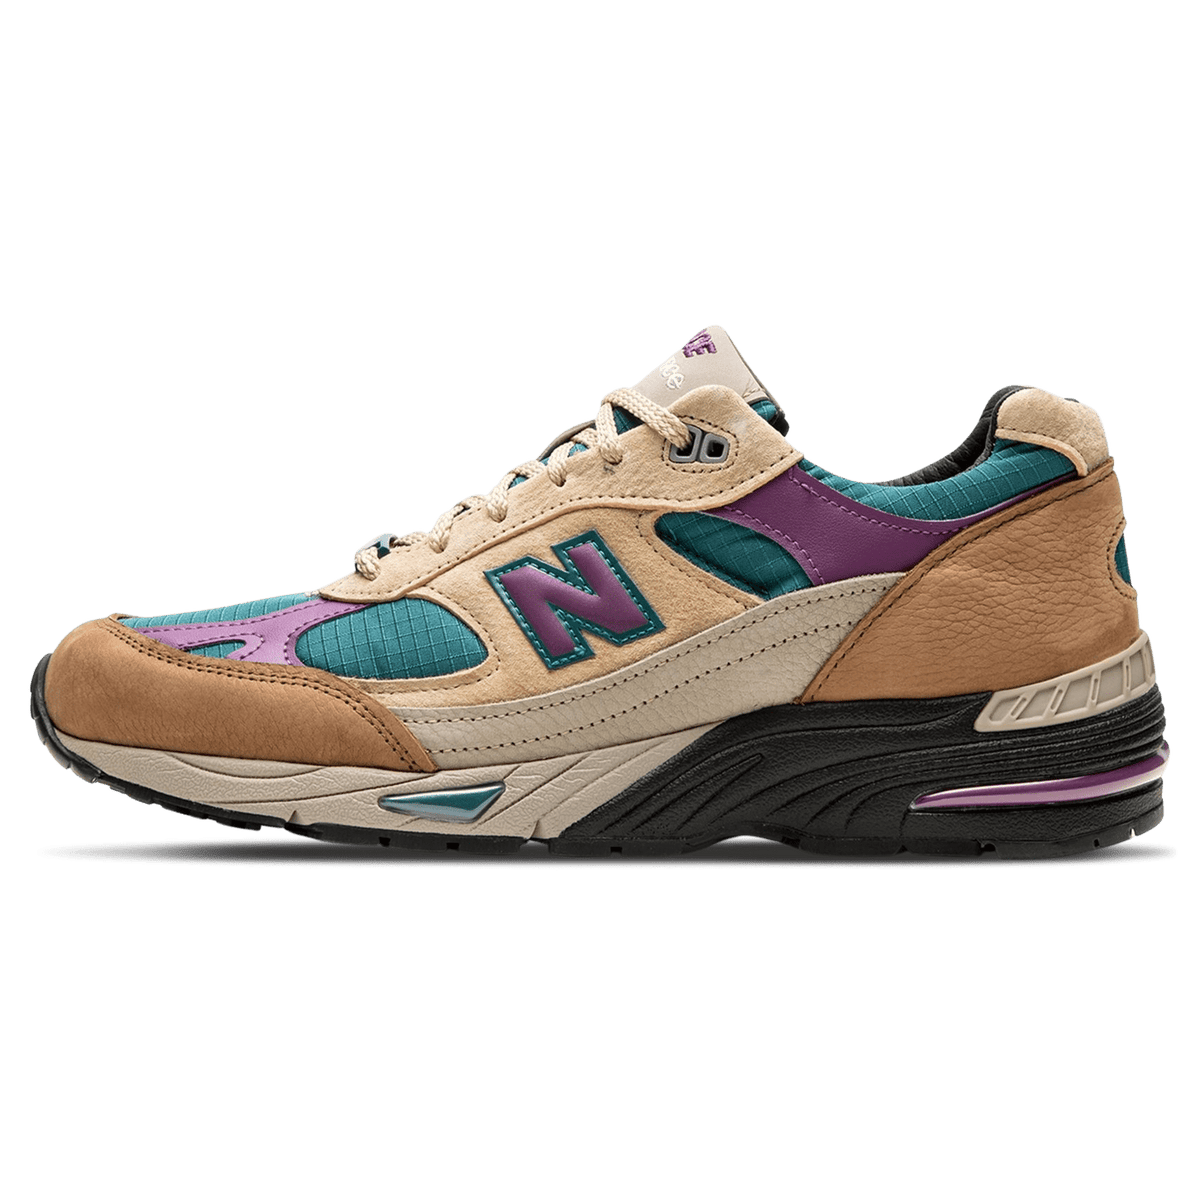 Palace x New Balance 991 Made in England 'Taos Taupe Grape' - CerbeShops